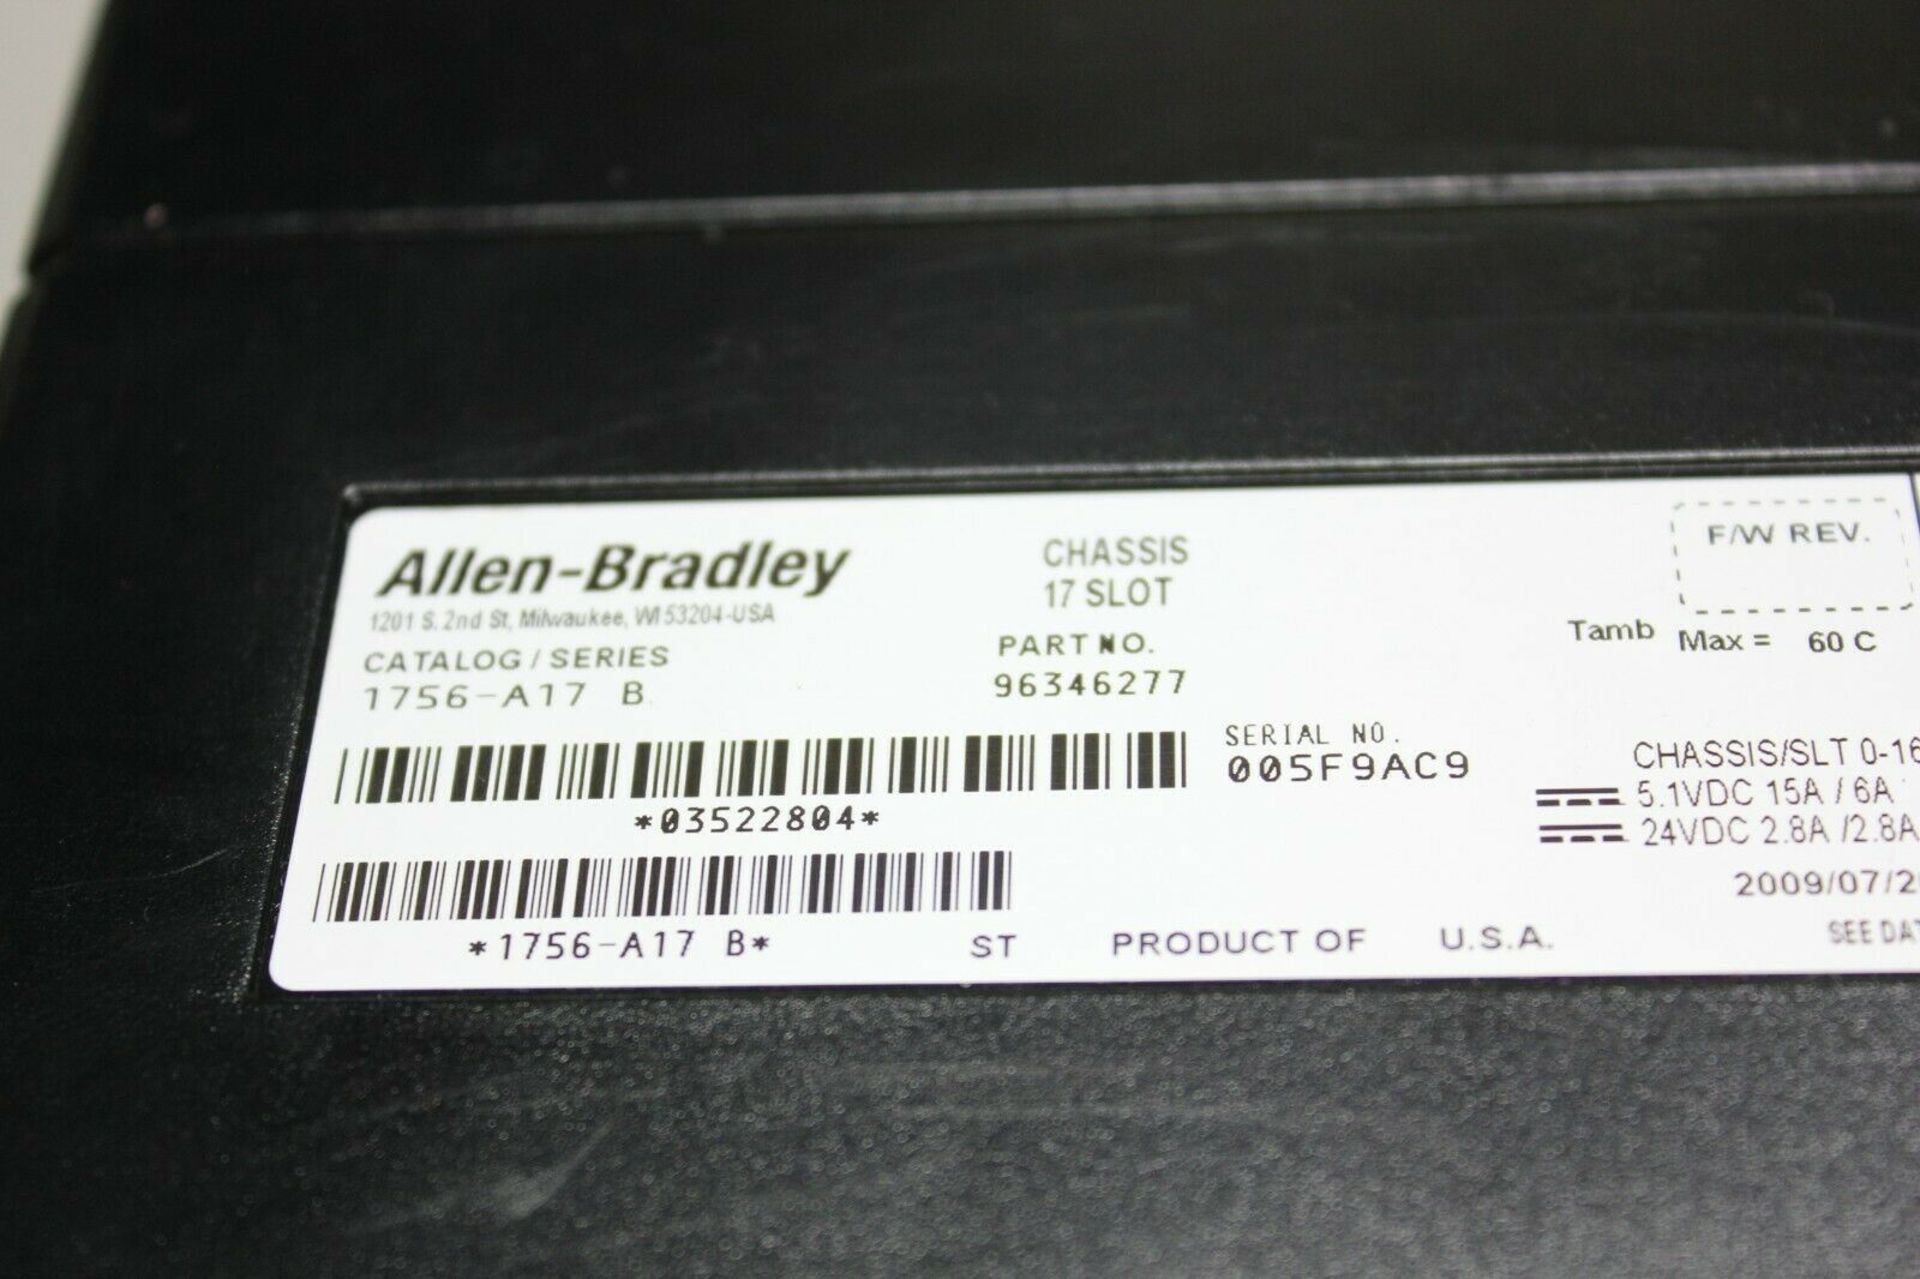 ALLEN BRADLEY CONTROLLOGIX 17 SLOT PLC CHASSIS & POWER SUPPLY - Image 4 of 4